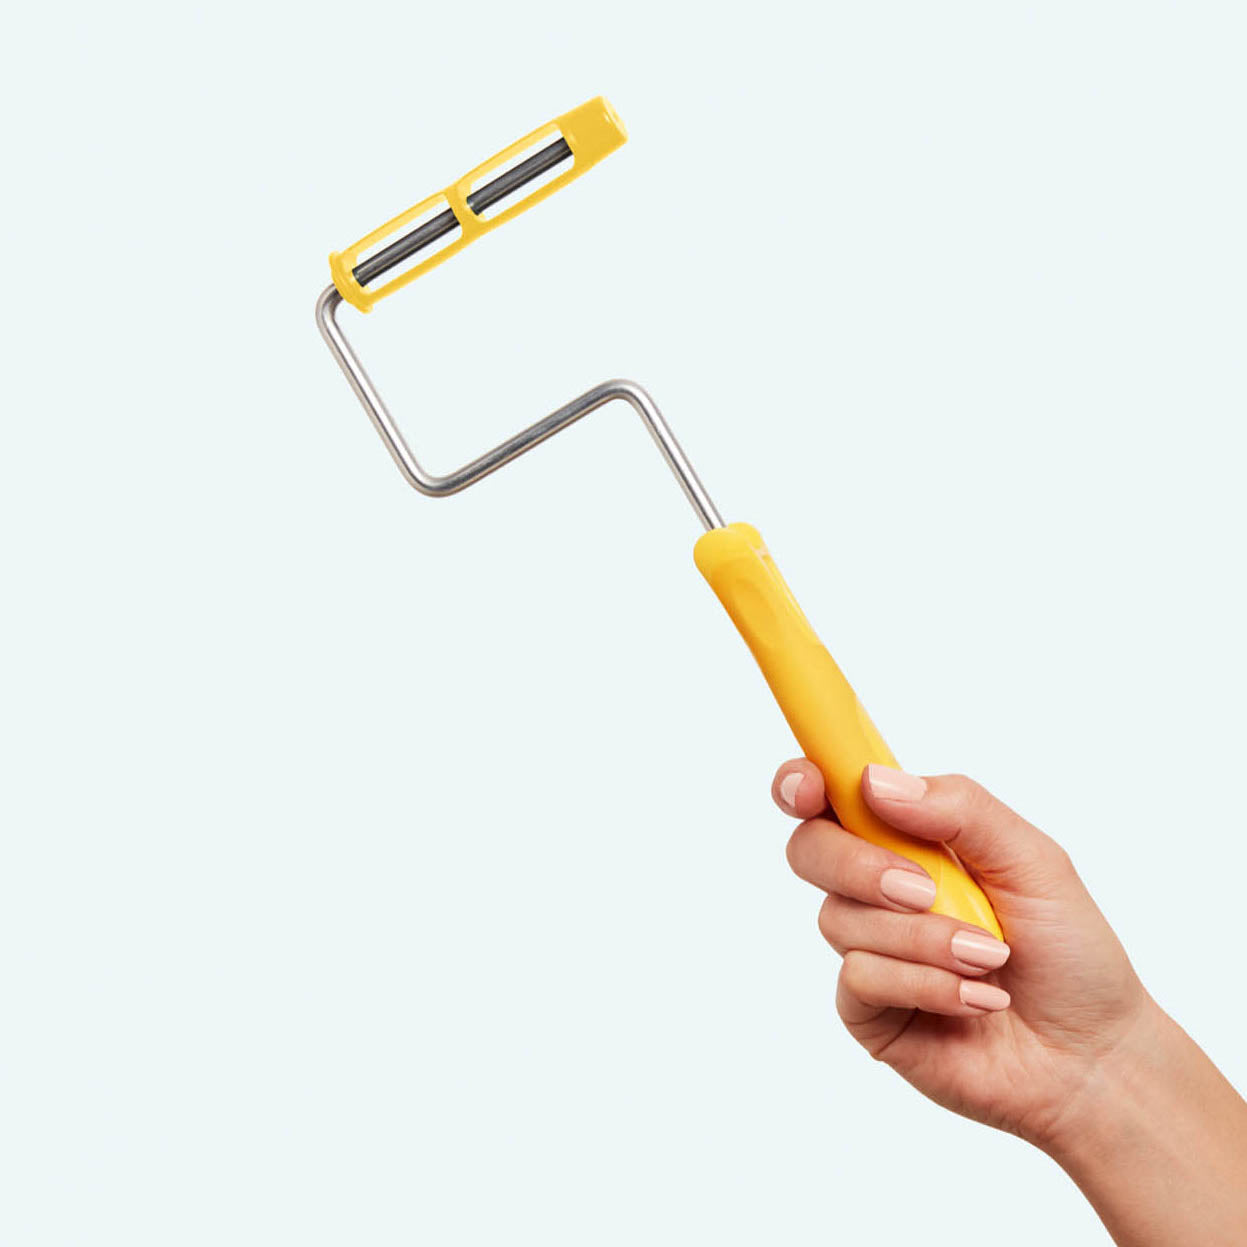 Paint roller cleaner